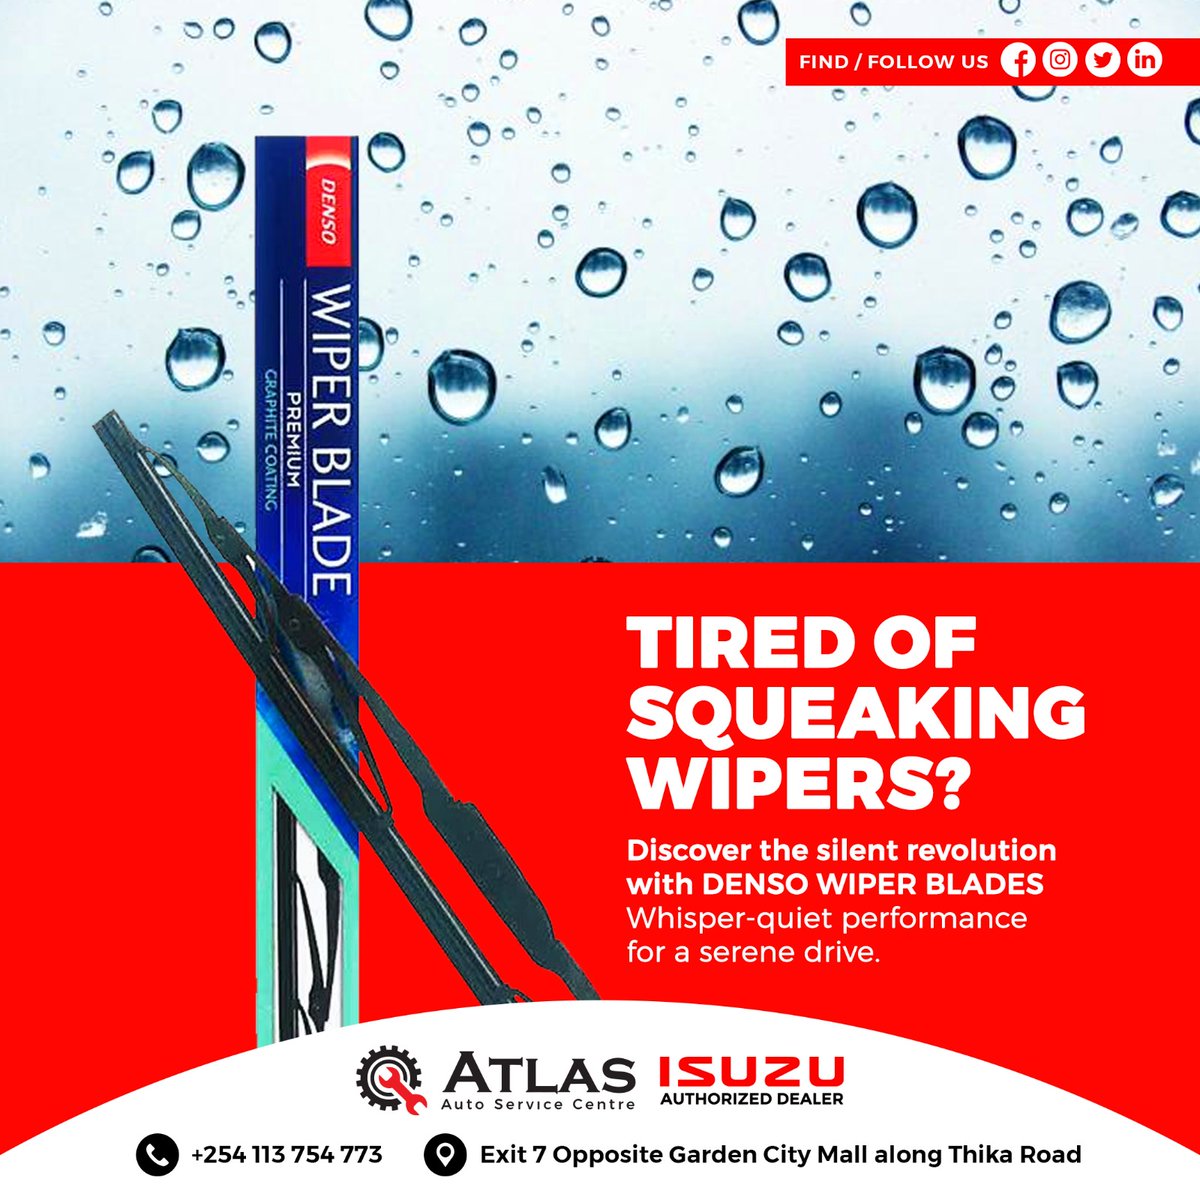 Tired of squeaking wipers? 🌧️ Unleash the silent revolution with [DENSO WIPER BLADES]—whisper-quiet performance for a serene drive in any weather. Say goodbye to the noise, embrace the tranquility!#howcanwehelp #WiperBlades #SilentDrive #DensoBlades #GalaxyS24 #VVAL #Kairo